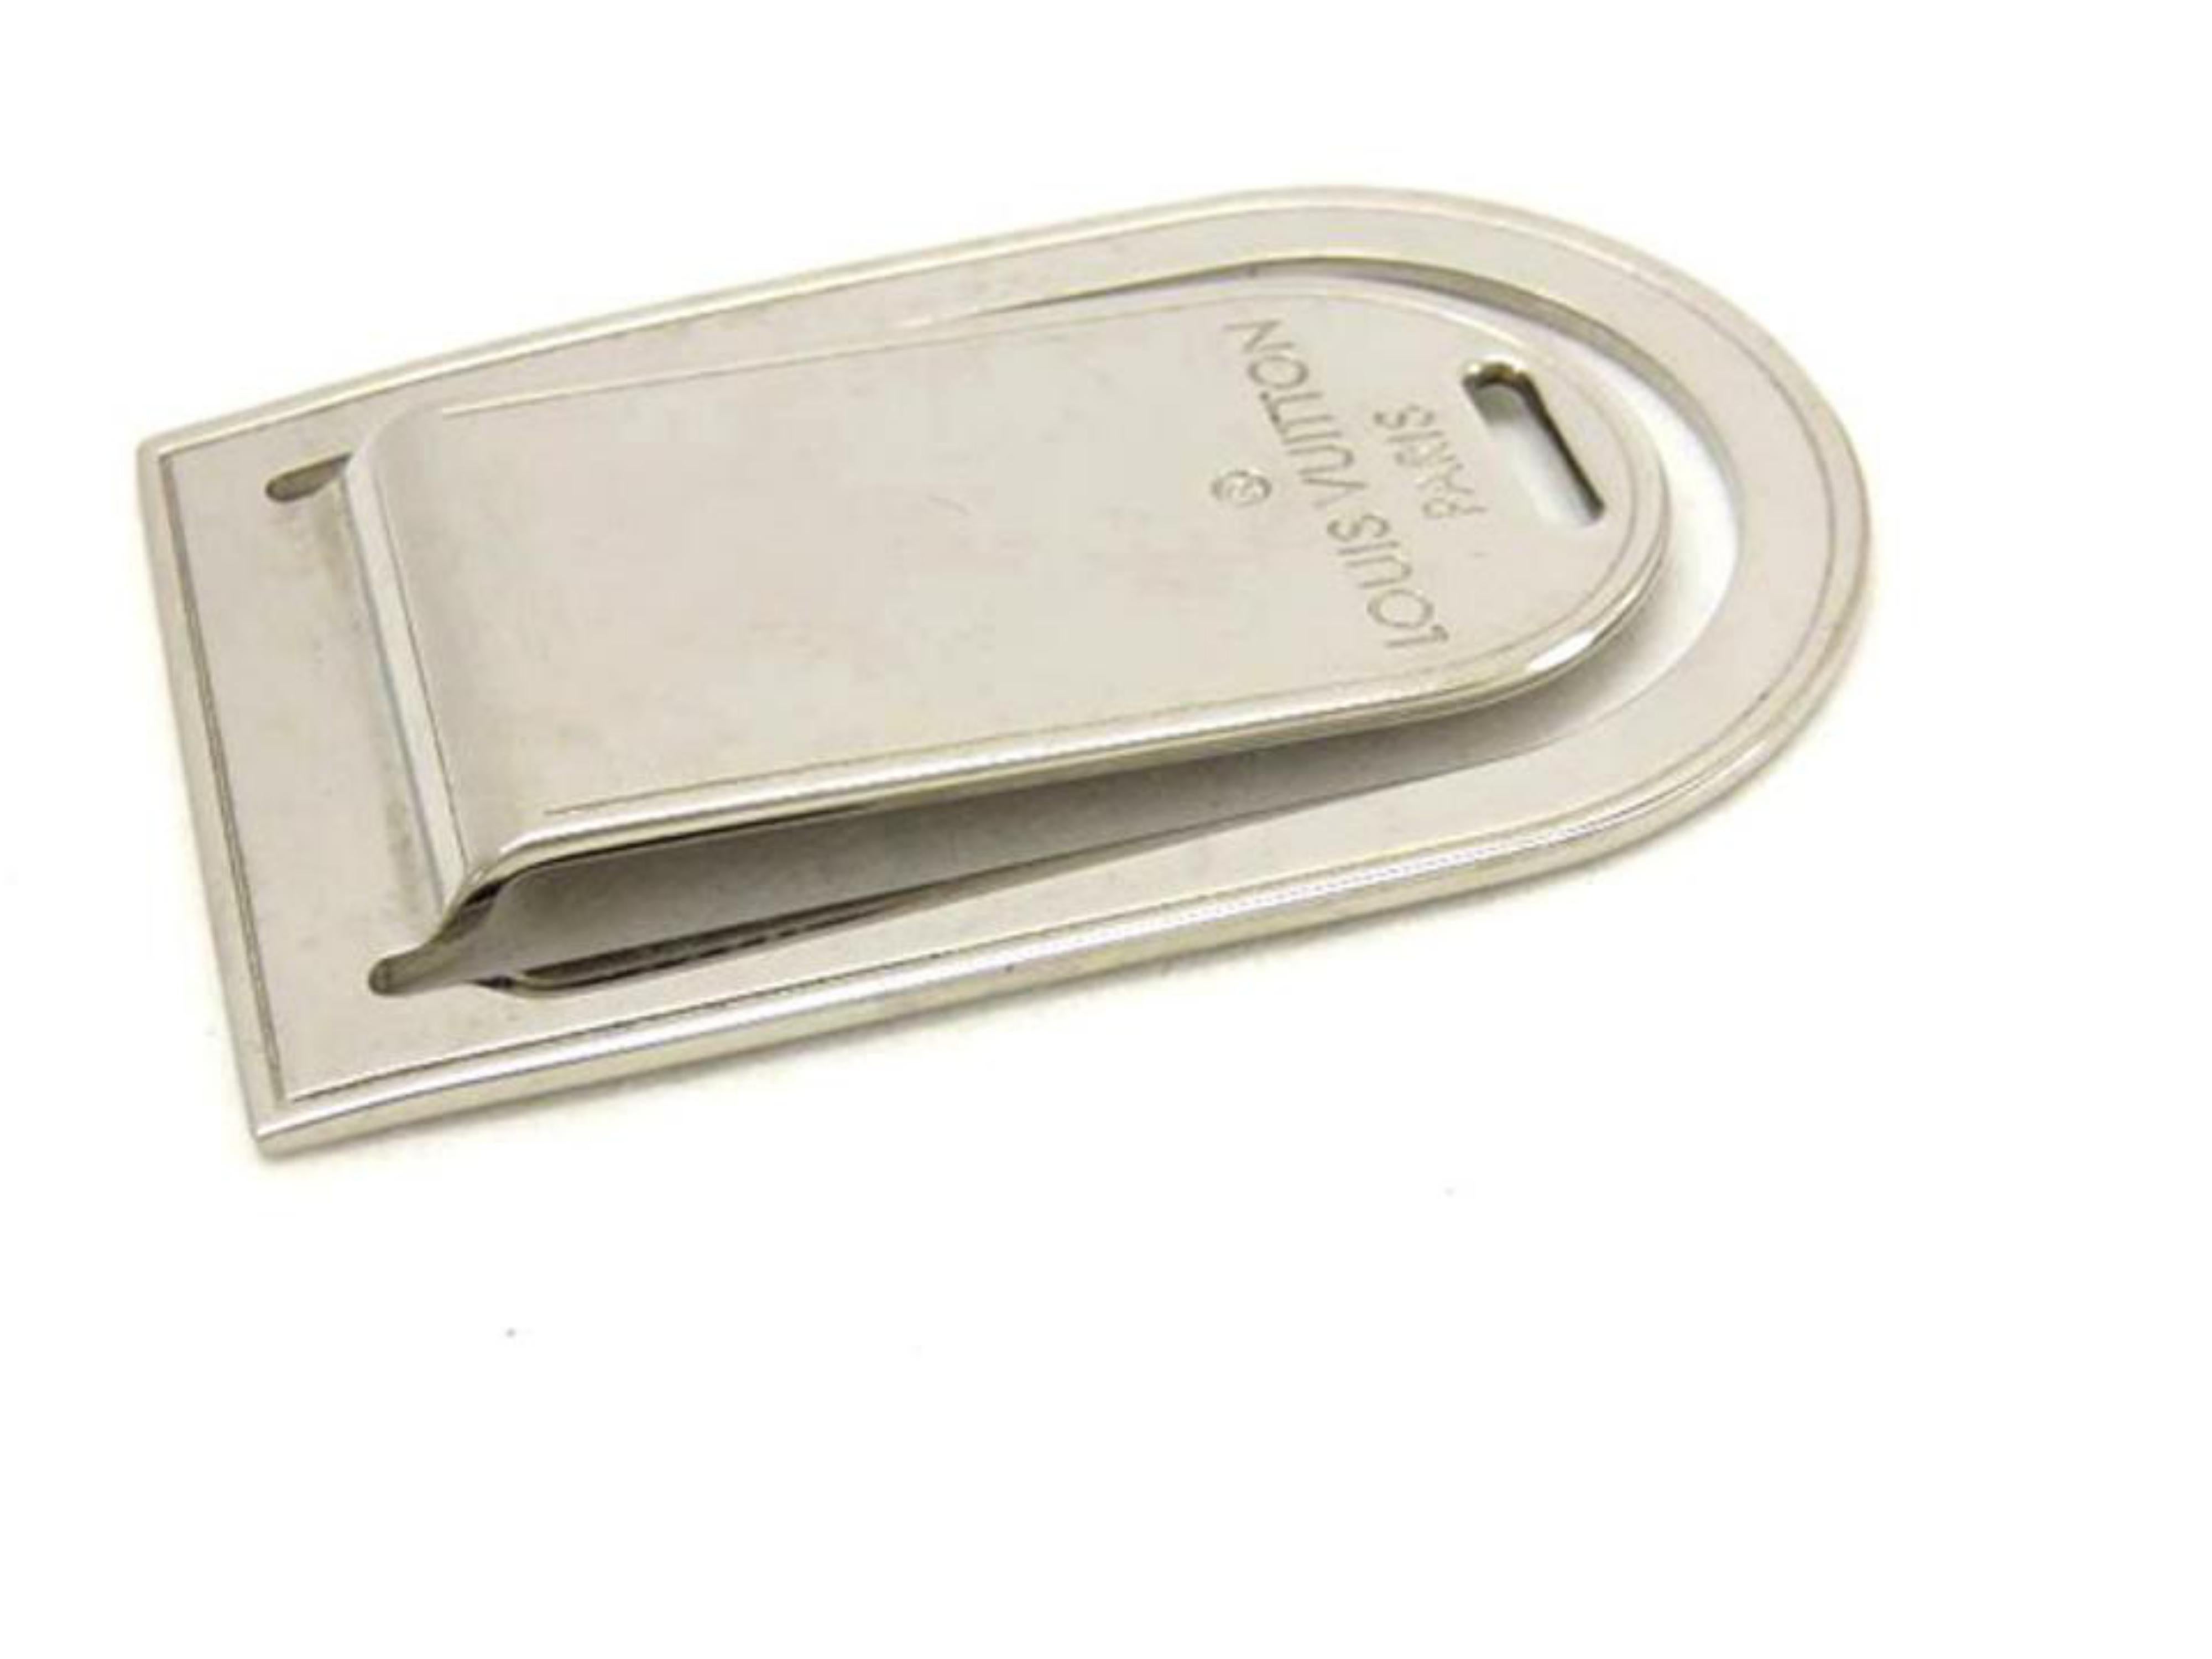 Louis Vuitton Silver Money Clip 221016 In Fair Condition For Sale In Forest Hills, NY